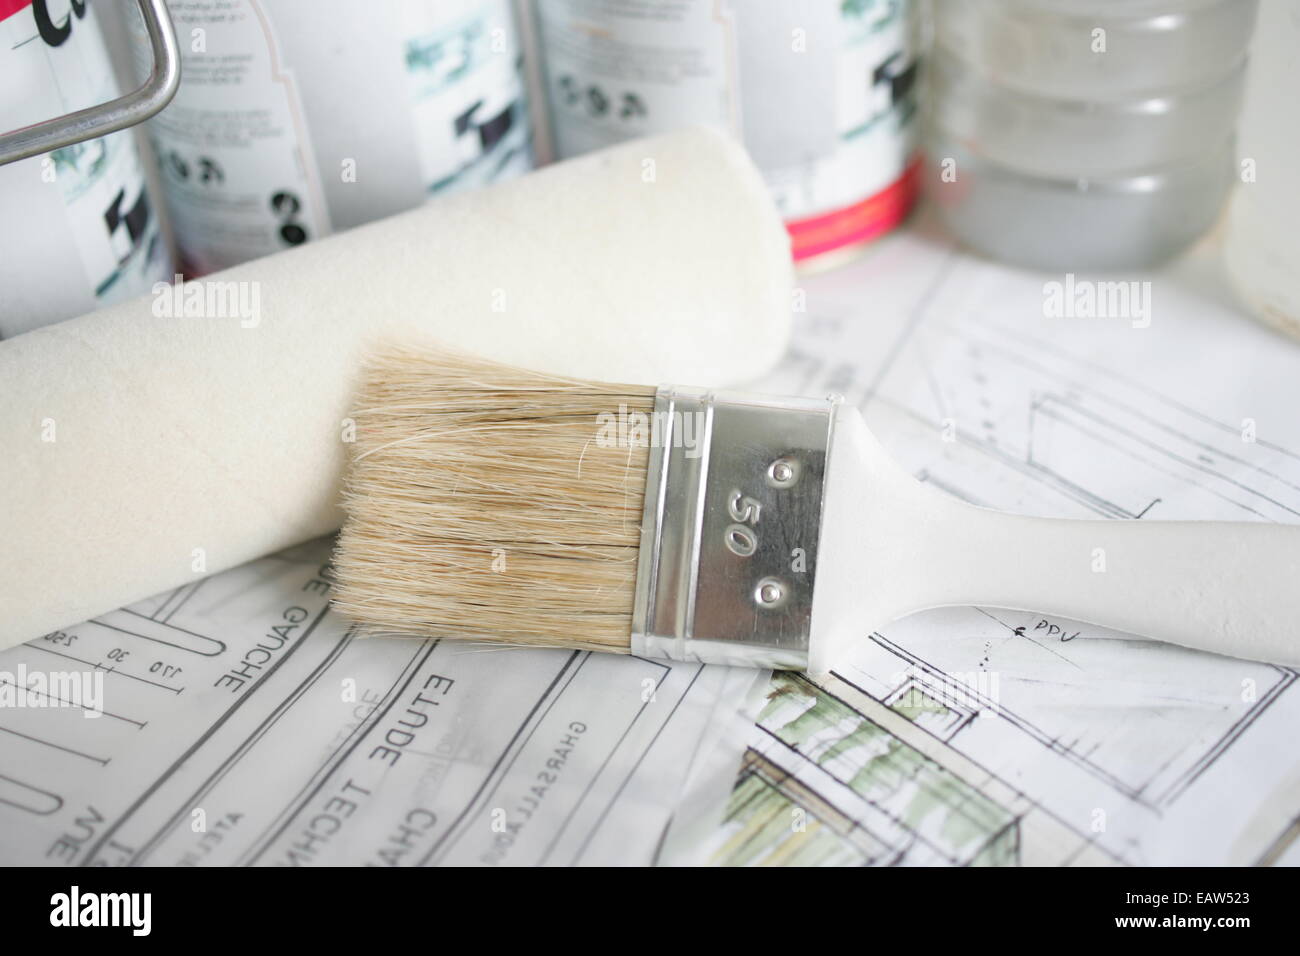 Decorating & Painting tools and materials Stock Photo